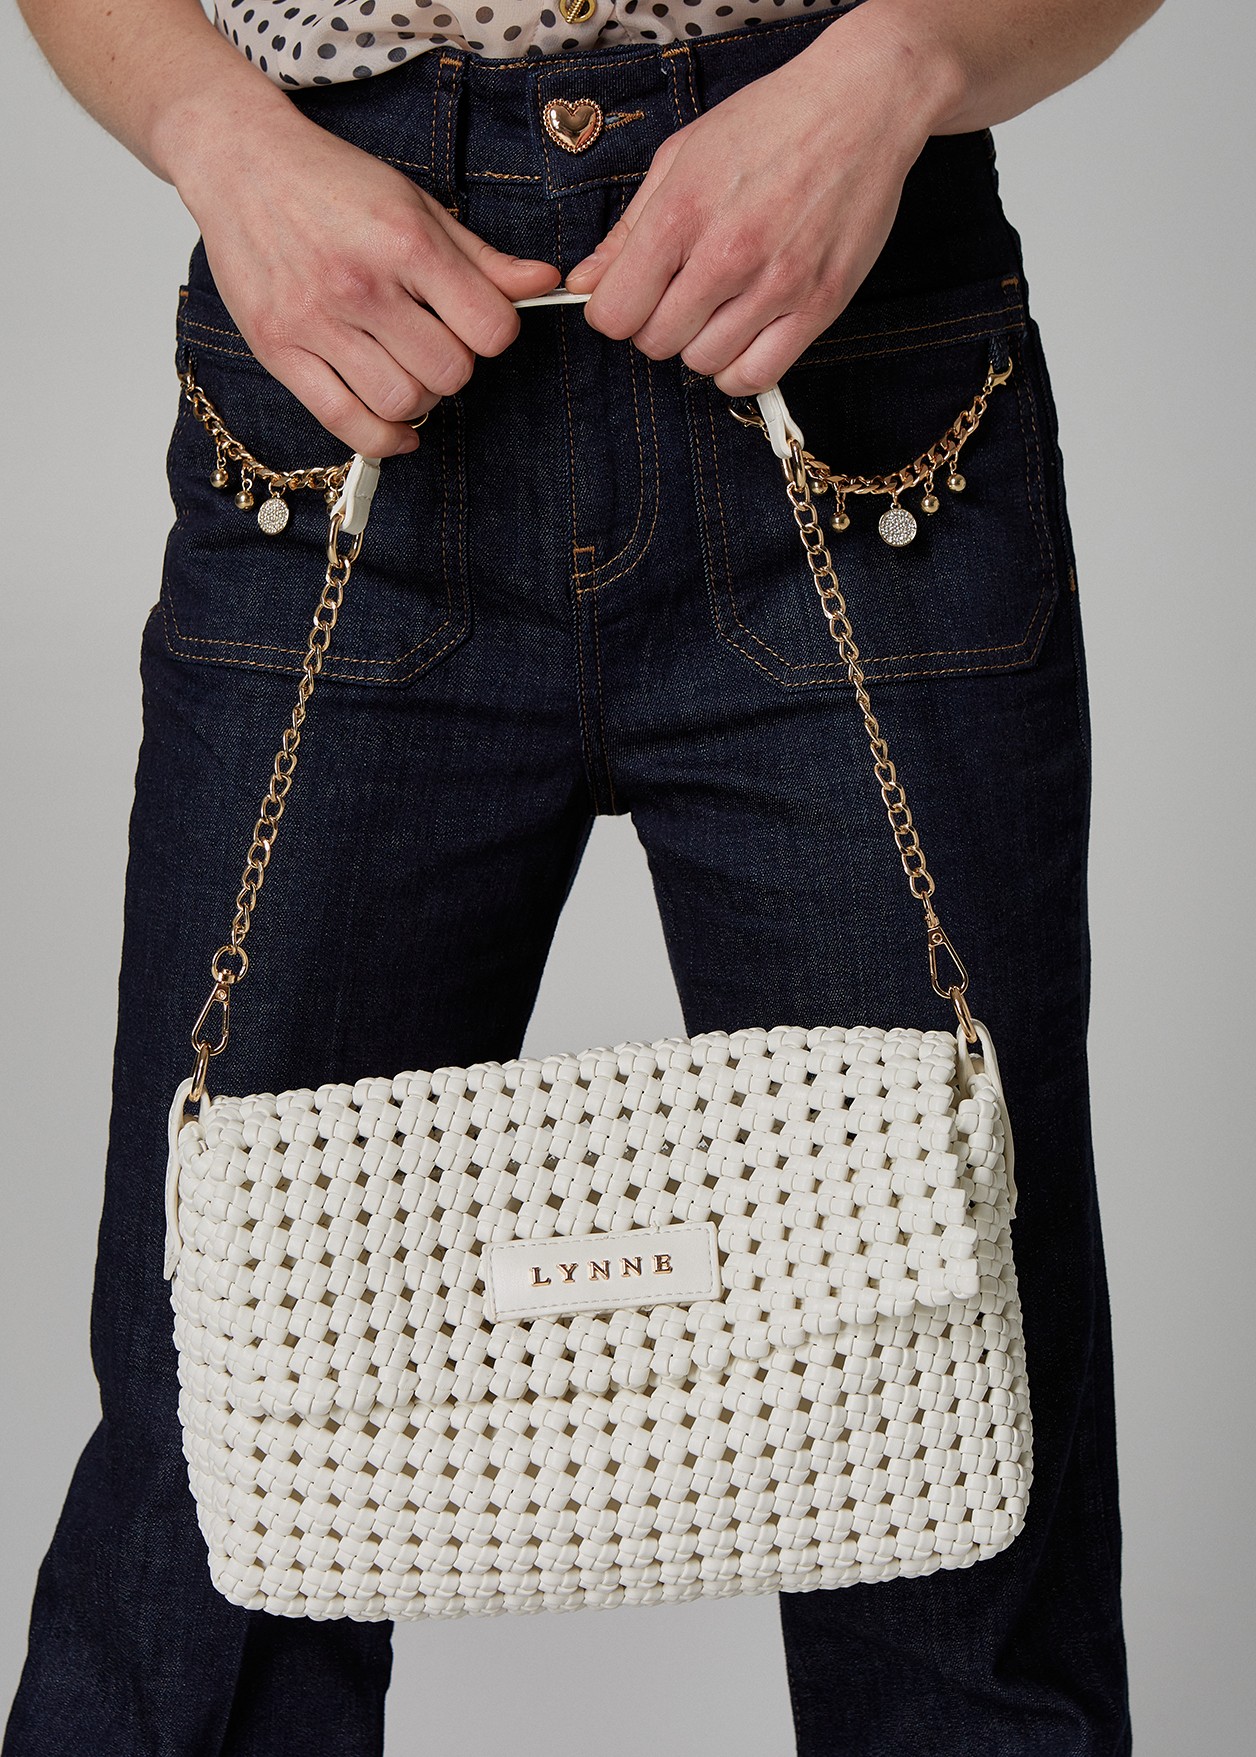 Wooven bag with metallic chain